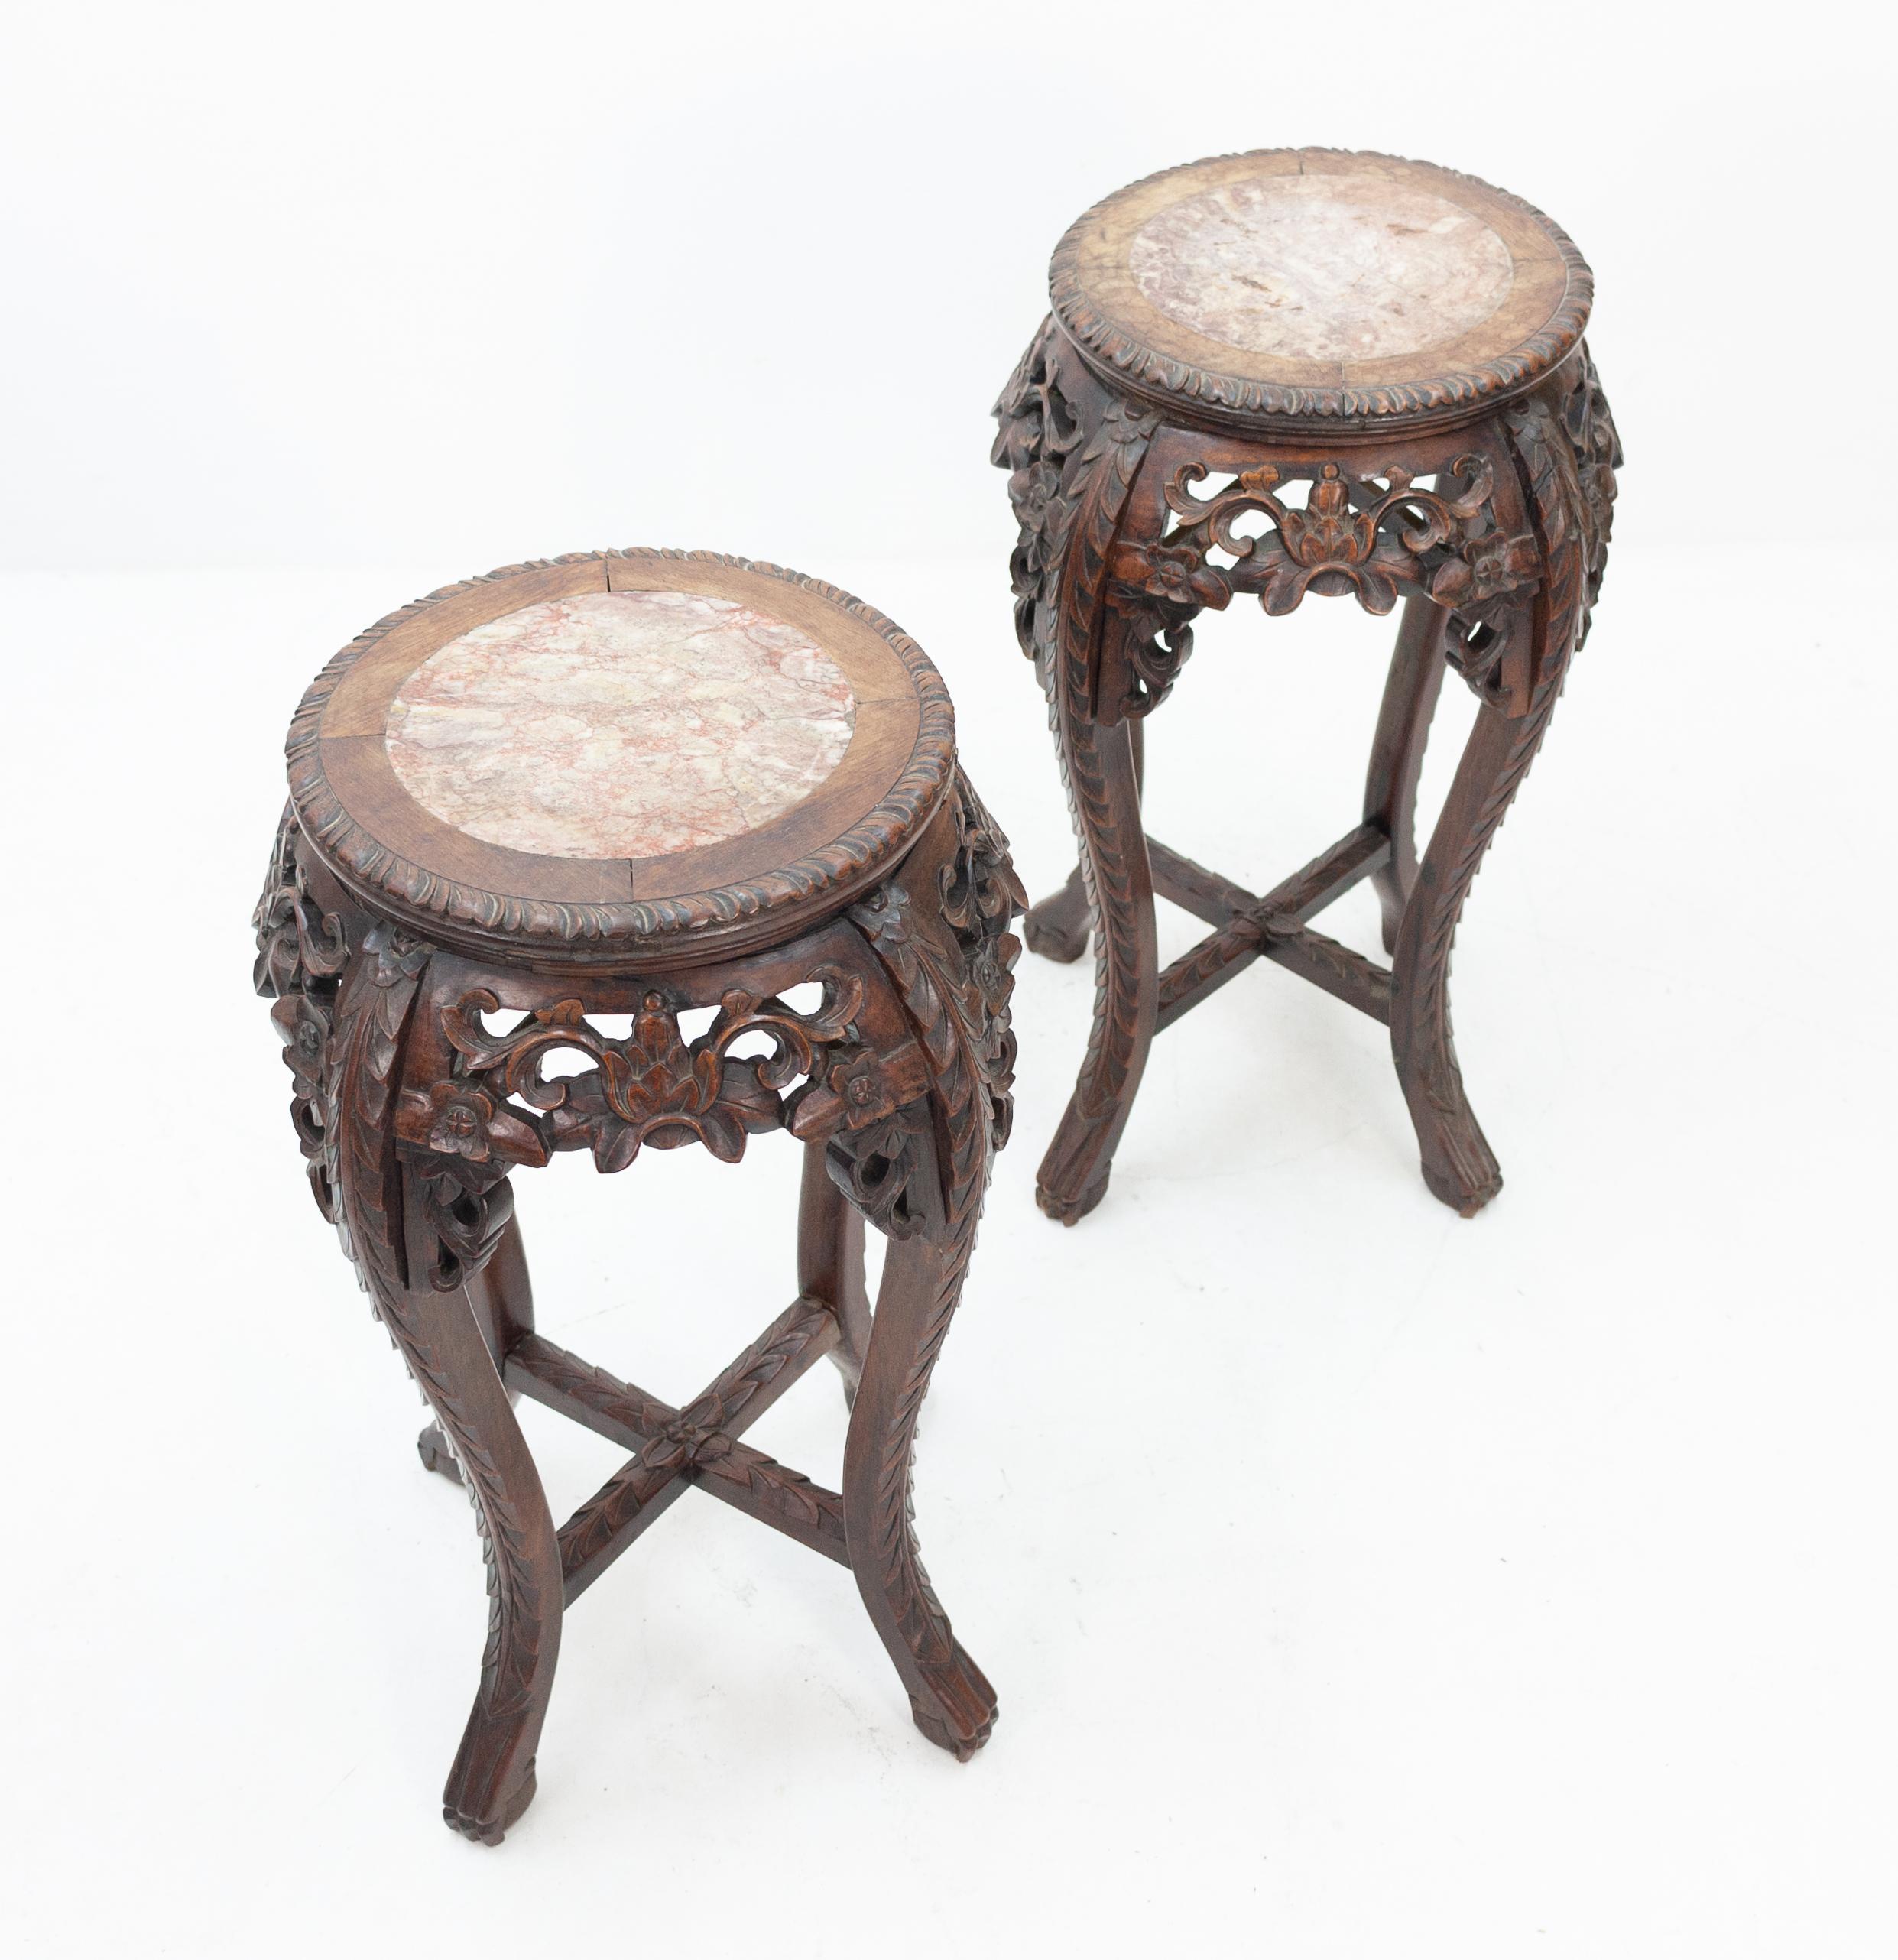 Matching pair of richly decorated hand carved plant stands with marble top surfaces. Good quality and condition, 19th century.